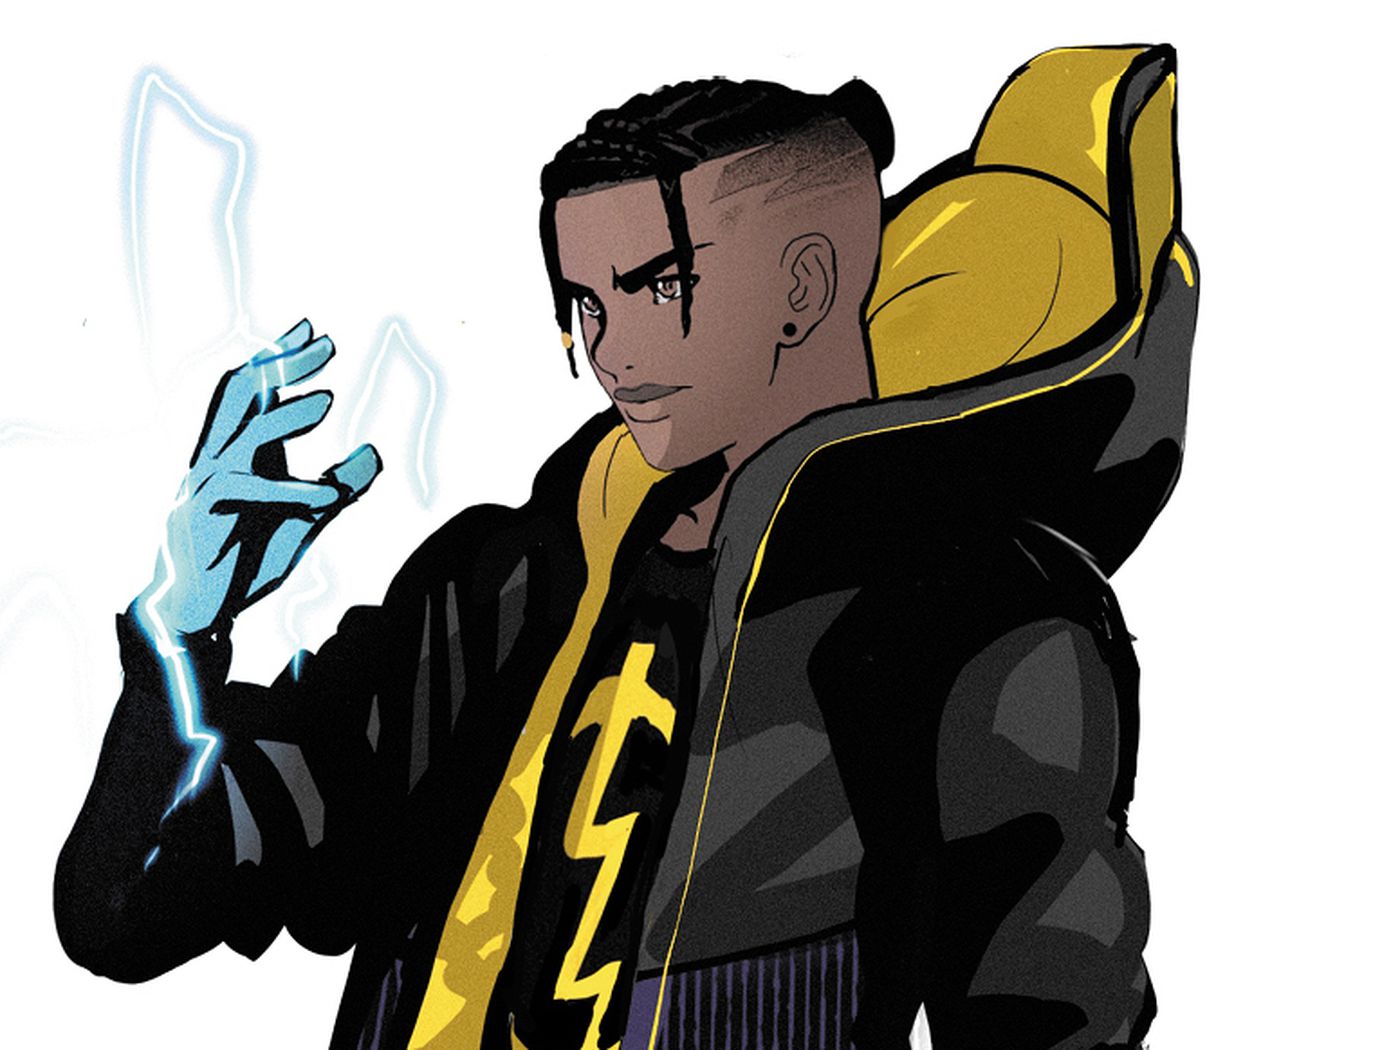 DC's reimagined Static Shock gives the hero a slick new look